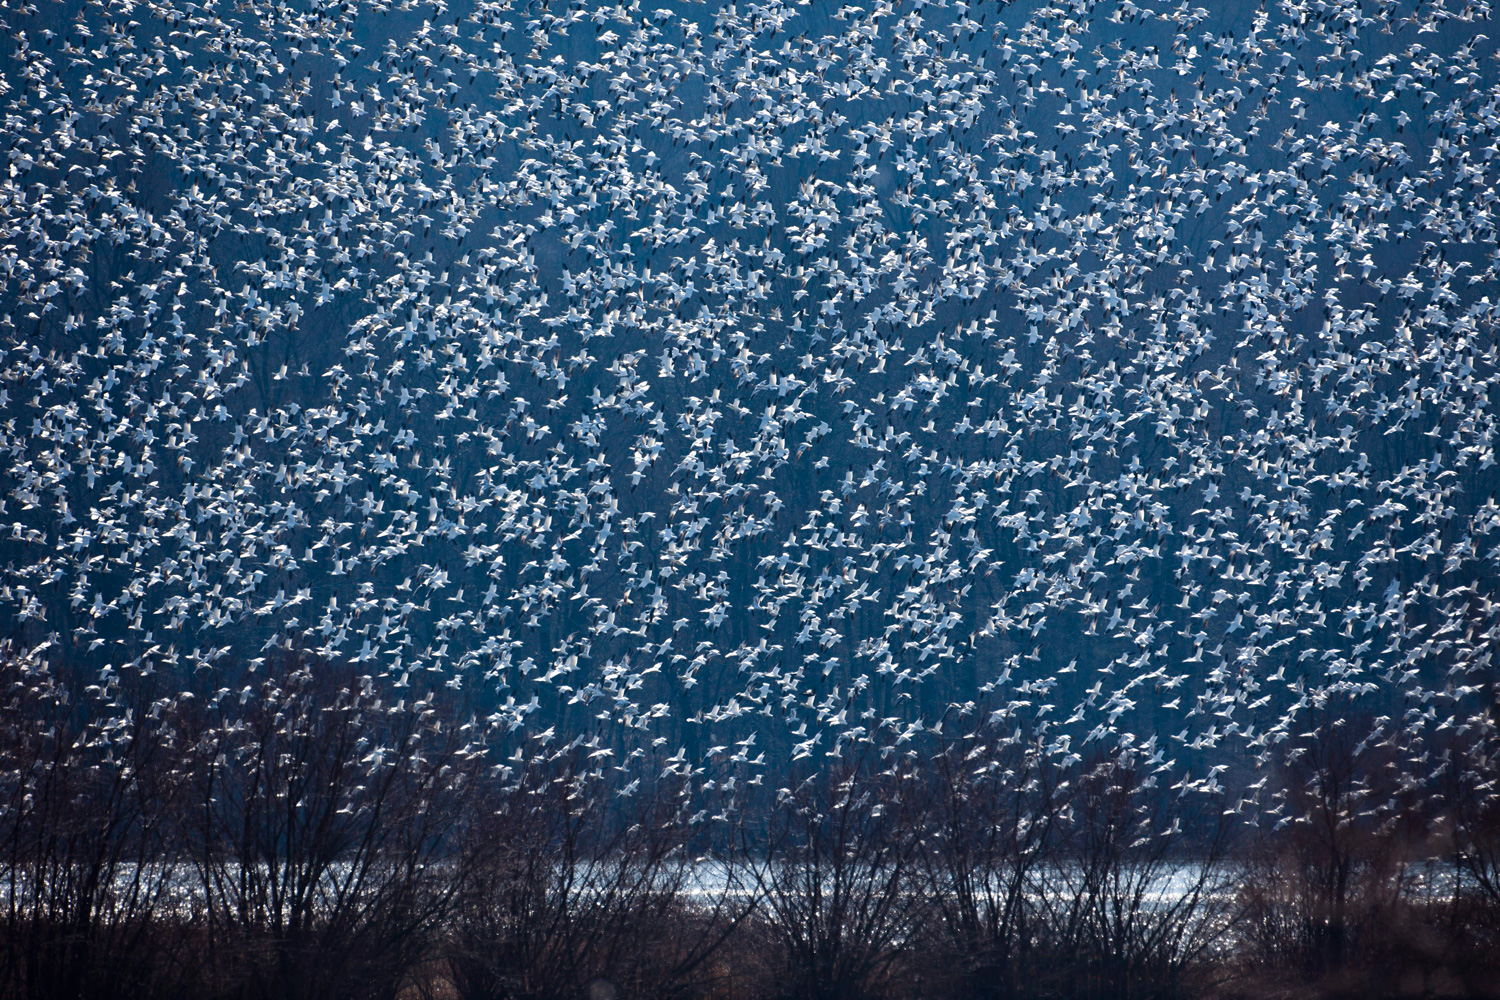 March 7, 2012. Snow geese, estimated some 30,000 strong, take off from the Middle Creek Reservoir near Kleinfeltersville, P.A.